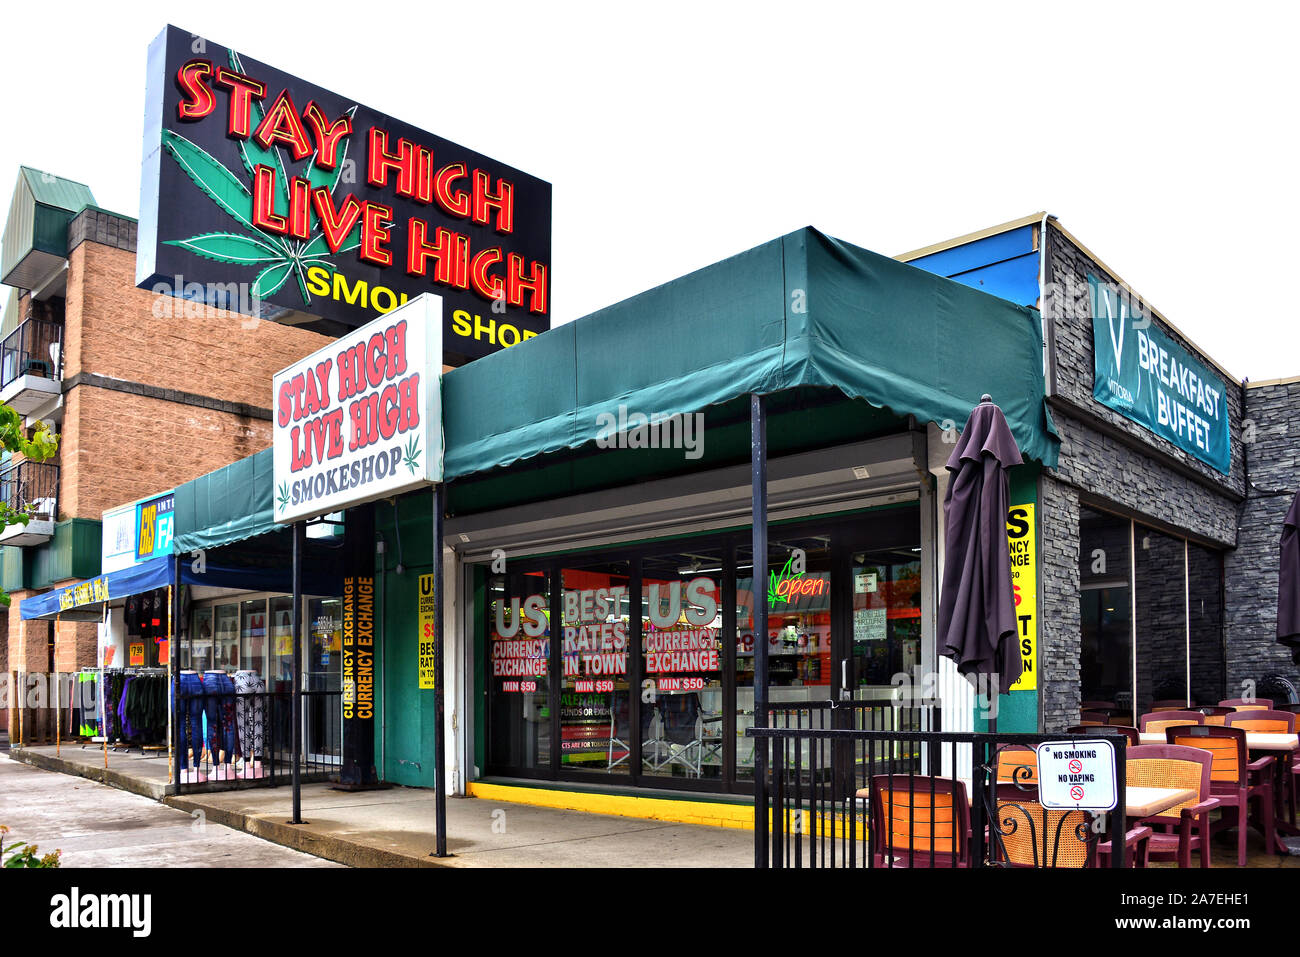 Niagara Falls, Canada - October 2, 2019: The Stay High Live High smoke shop on Victoria.  Cannabis is legal in Canada but a license from the province Stock Photo